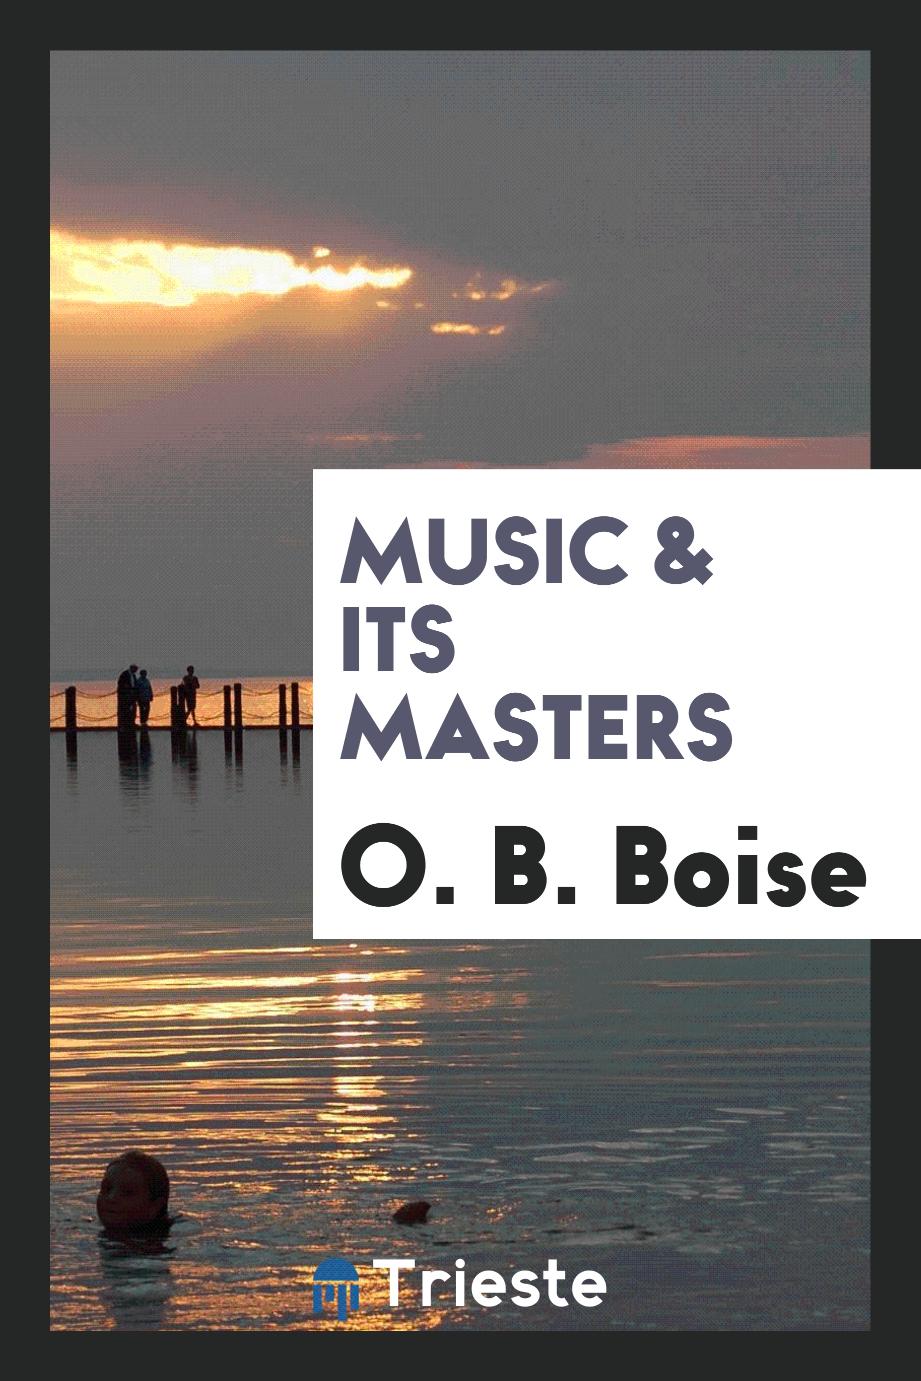 Music & its masters